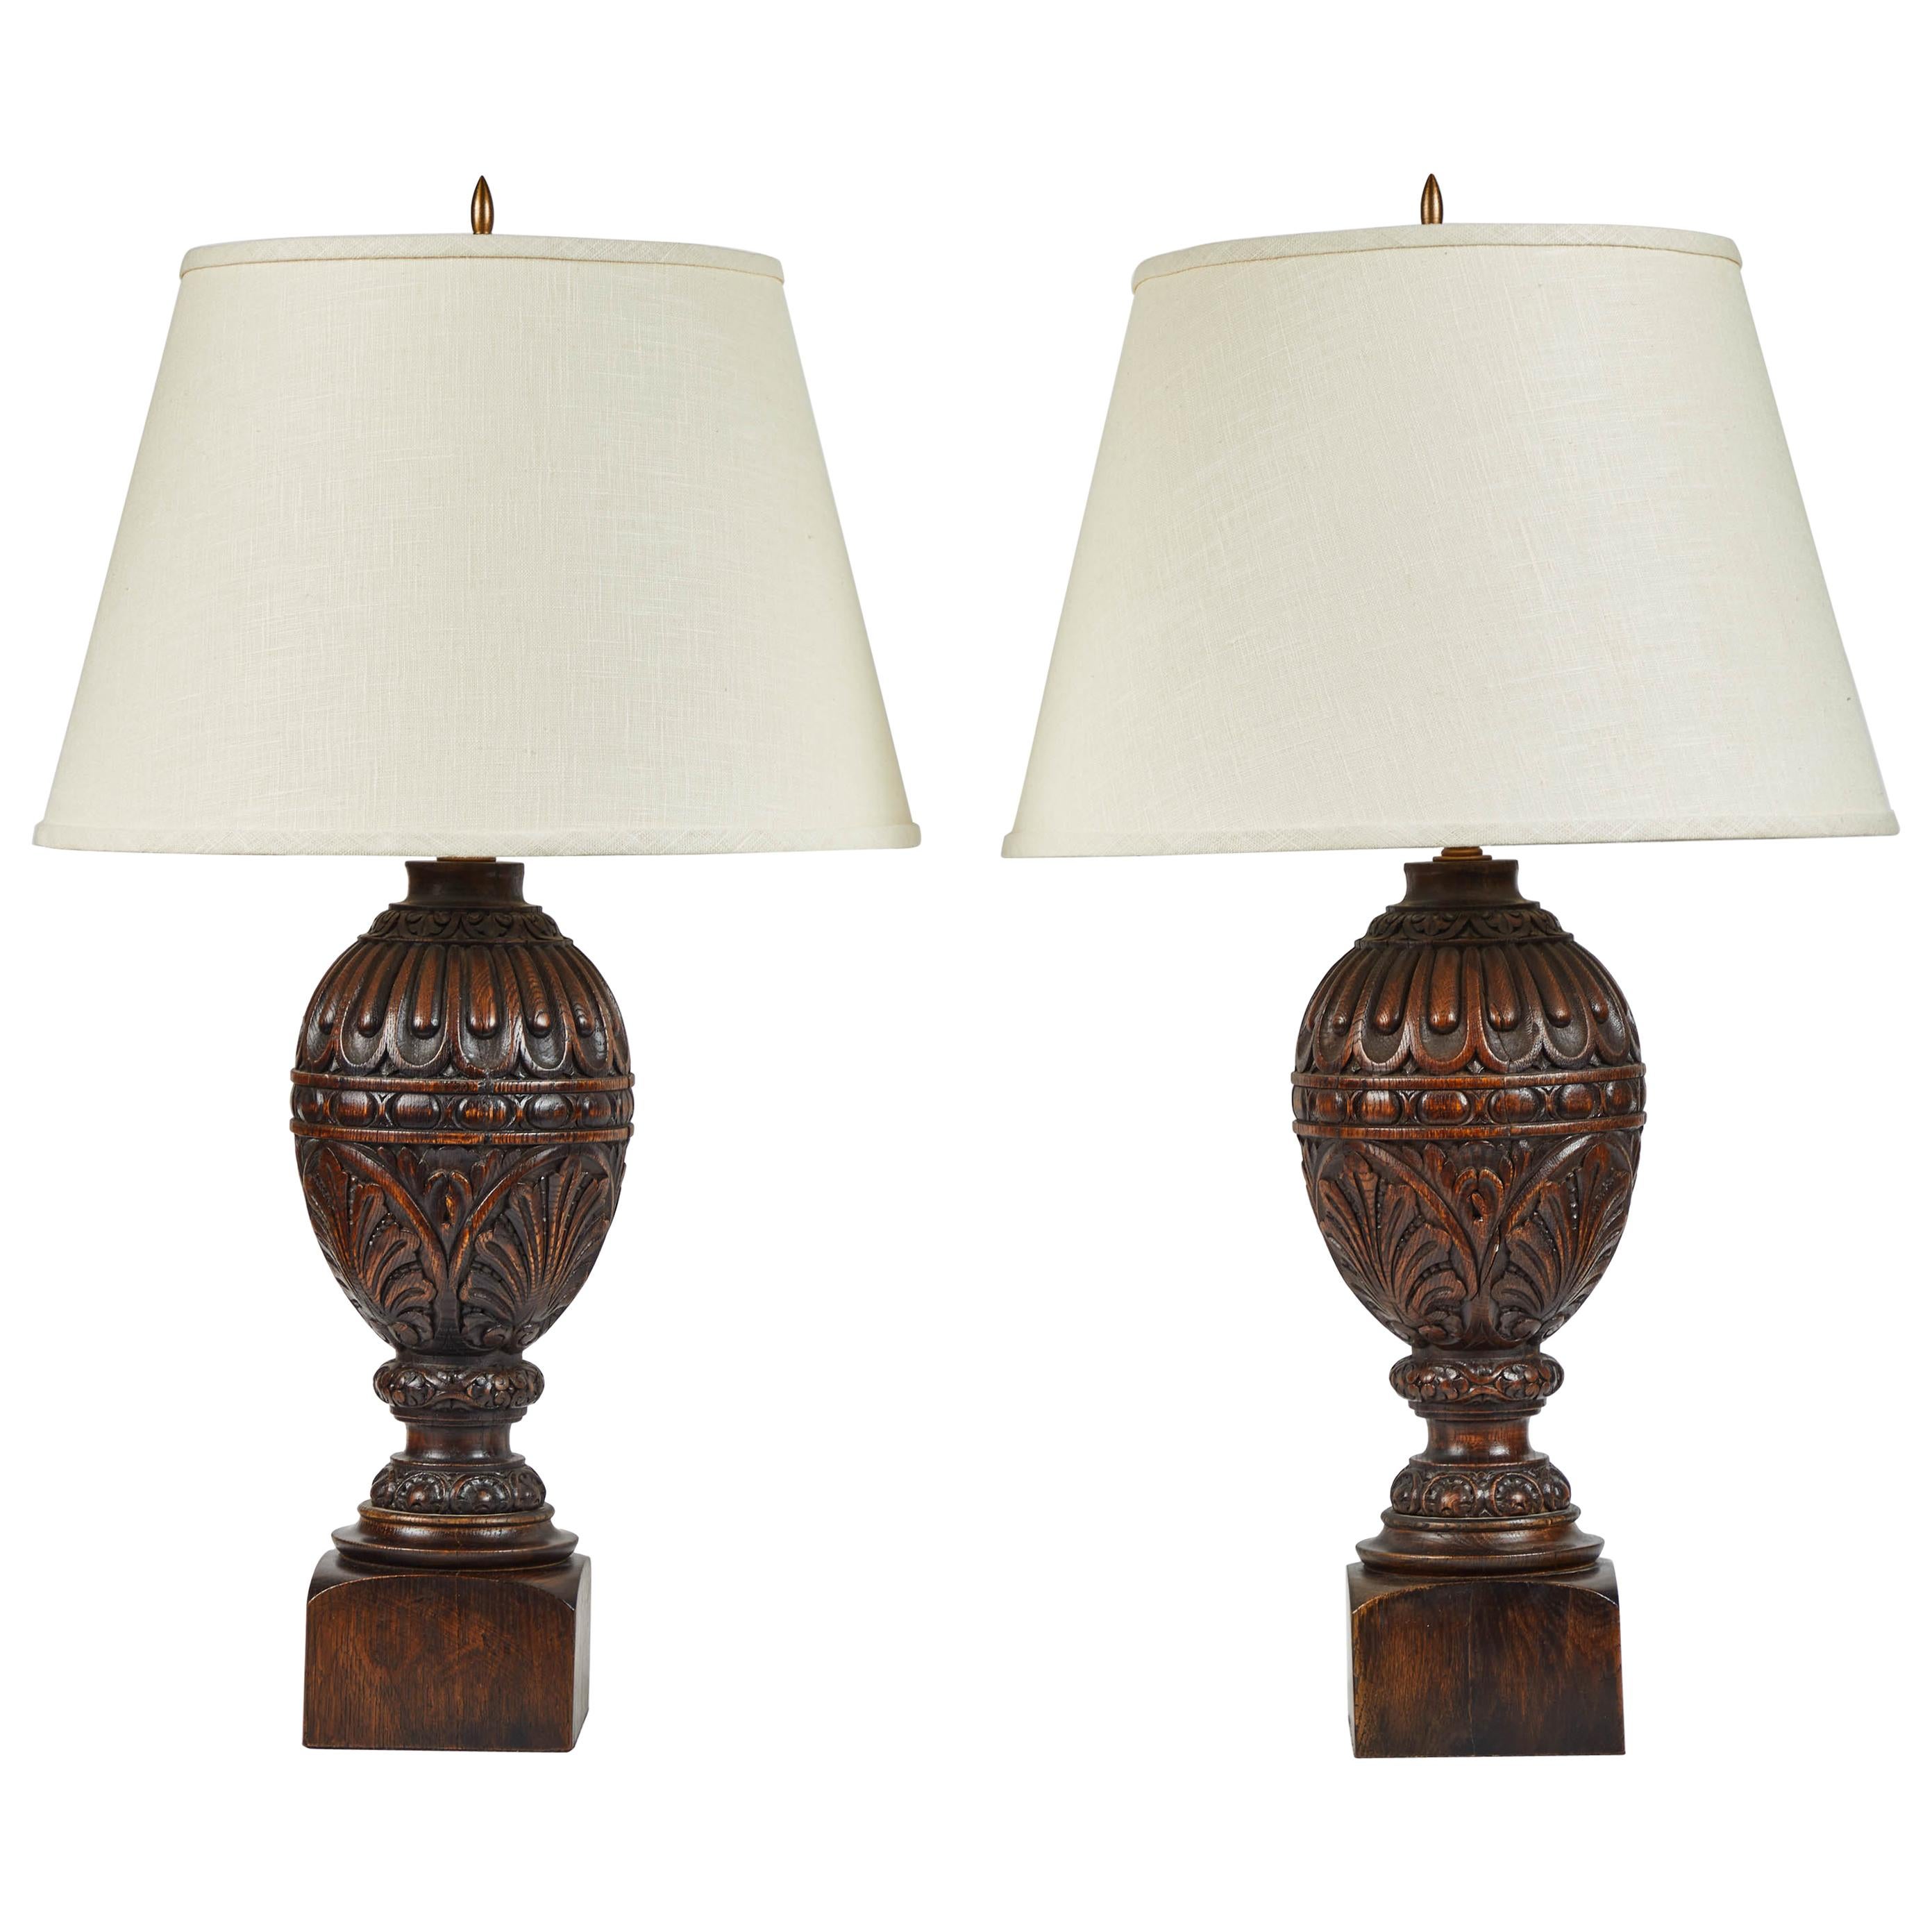 Pair of Early 20th Century Carved Oak Lamps